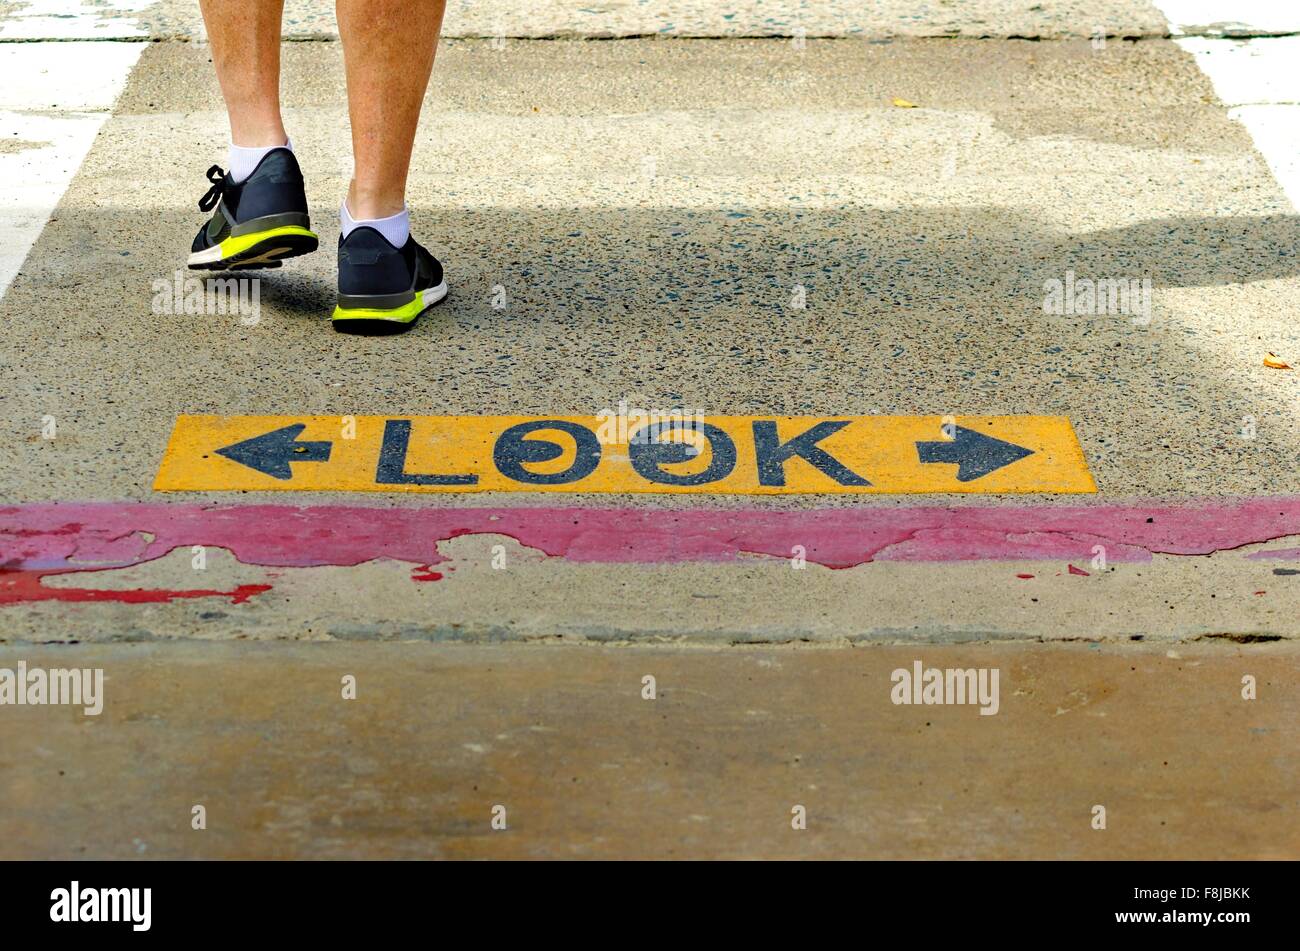 A black and yellow plastered look both ways sign on the road, with eyes drawn inside the o, which warns pedestrians to be carefu Stock Photo